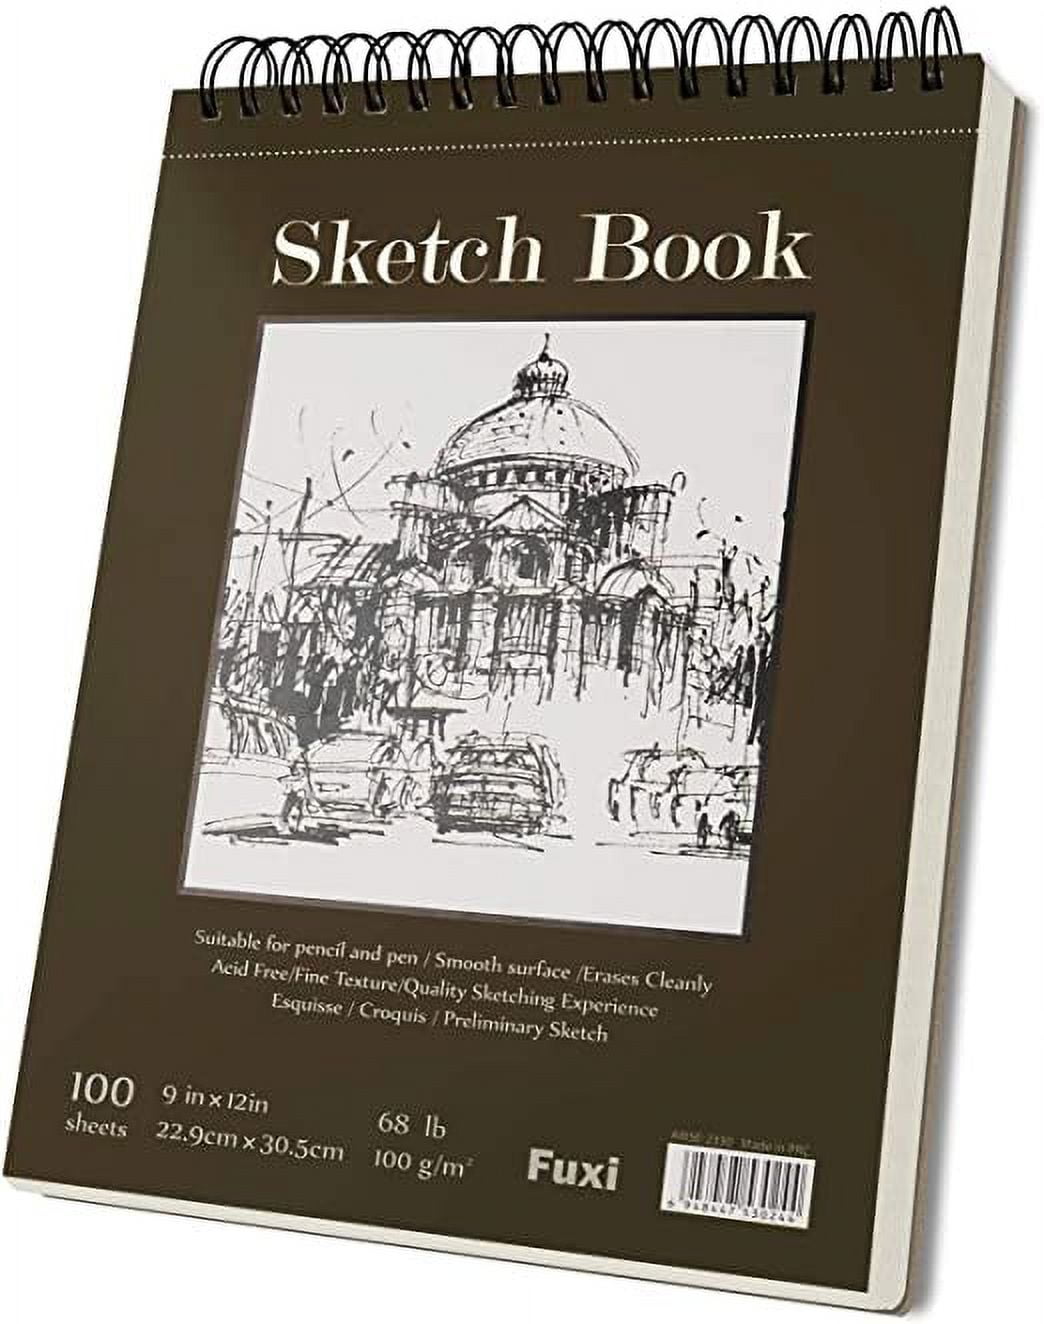 Cabreche Cute Sketchbook Top Spiral Bound Sketch Pad, 9 x 12 inch,100GSM Thick Paper,50 Sheets 100 Pages,Art Sketch Book Artistic Aesthetic Writing